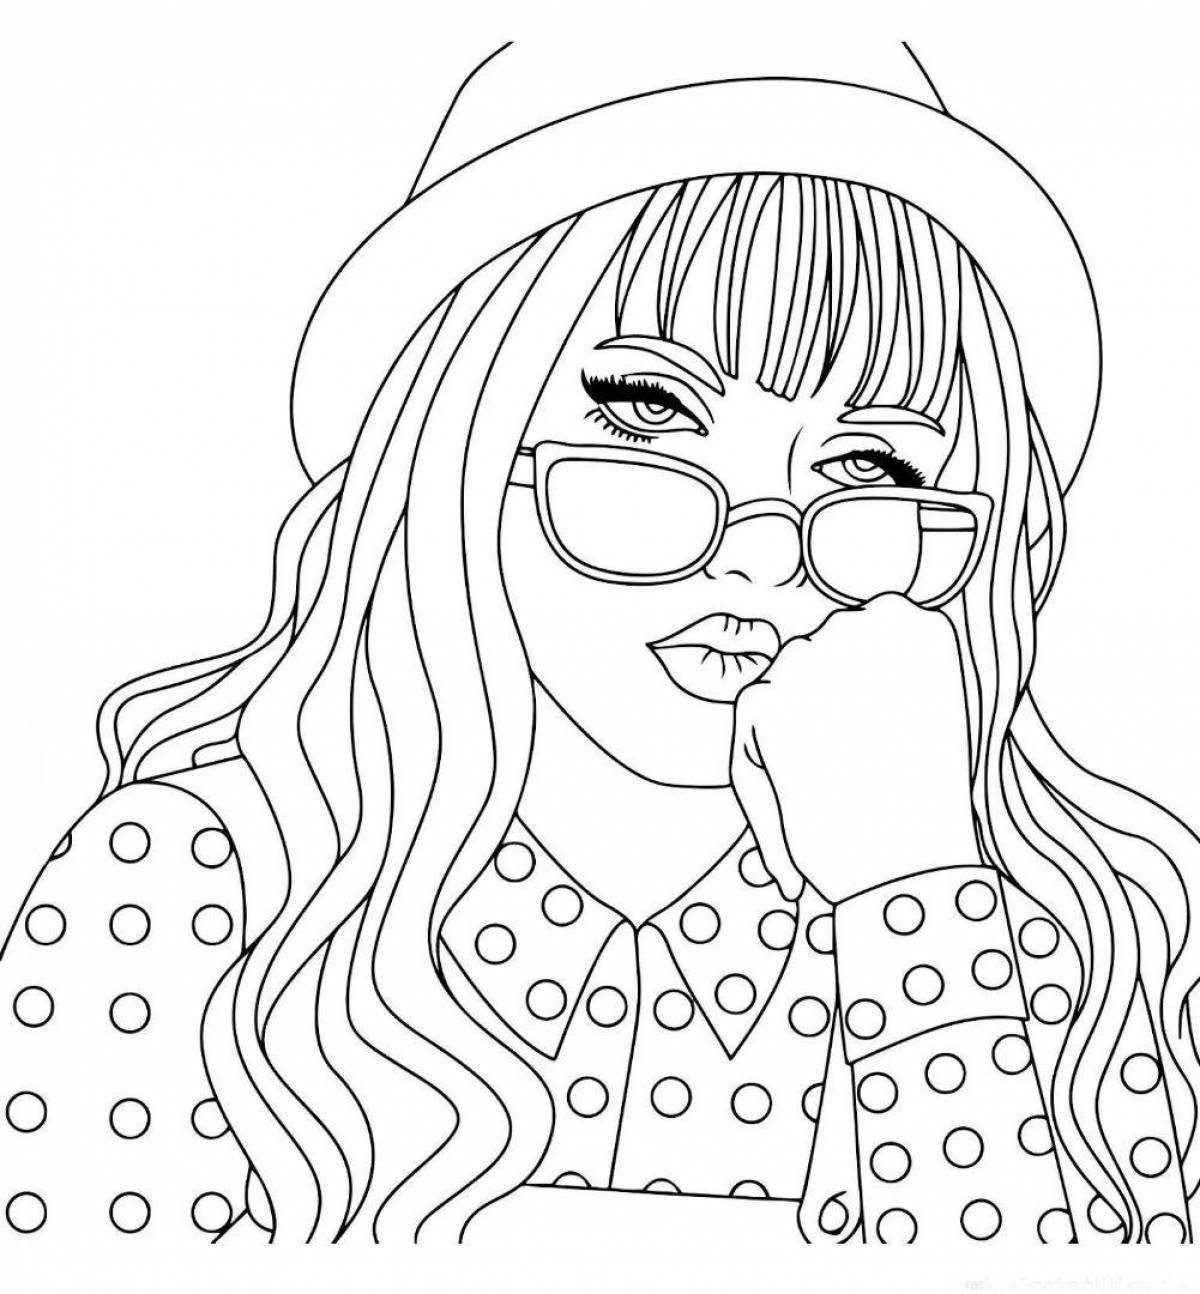 Fancy cool trendy coloring book